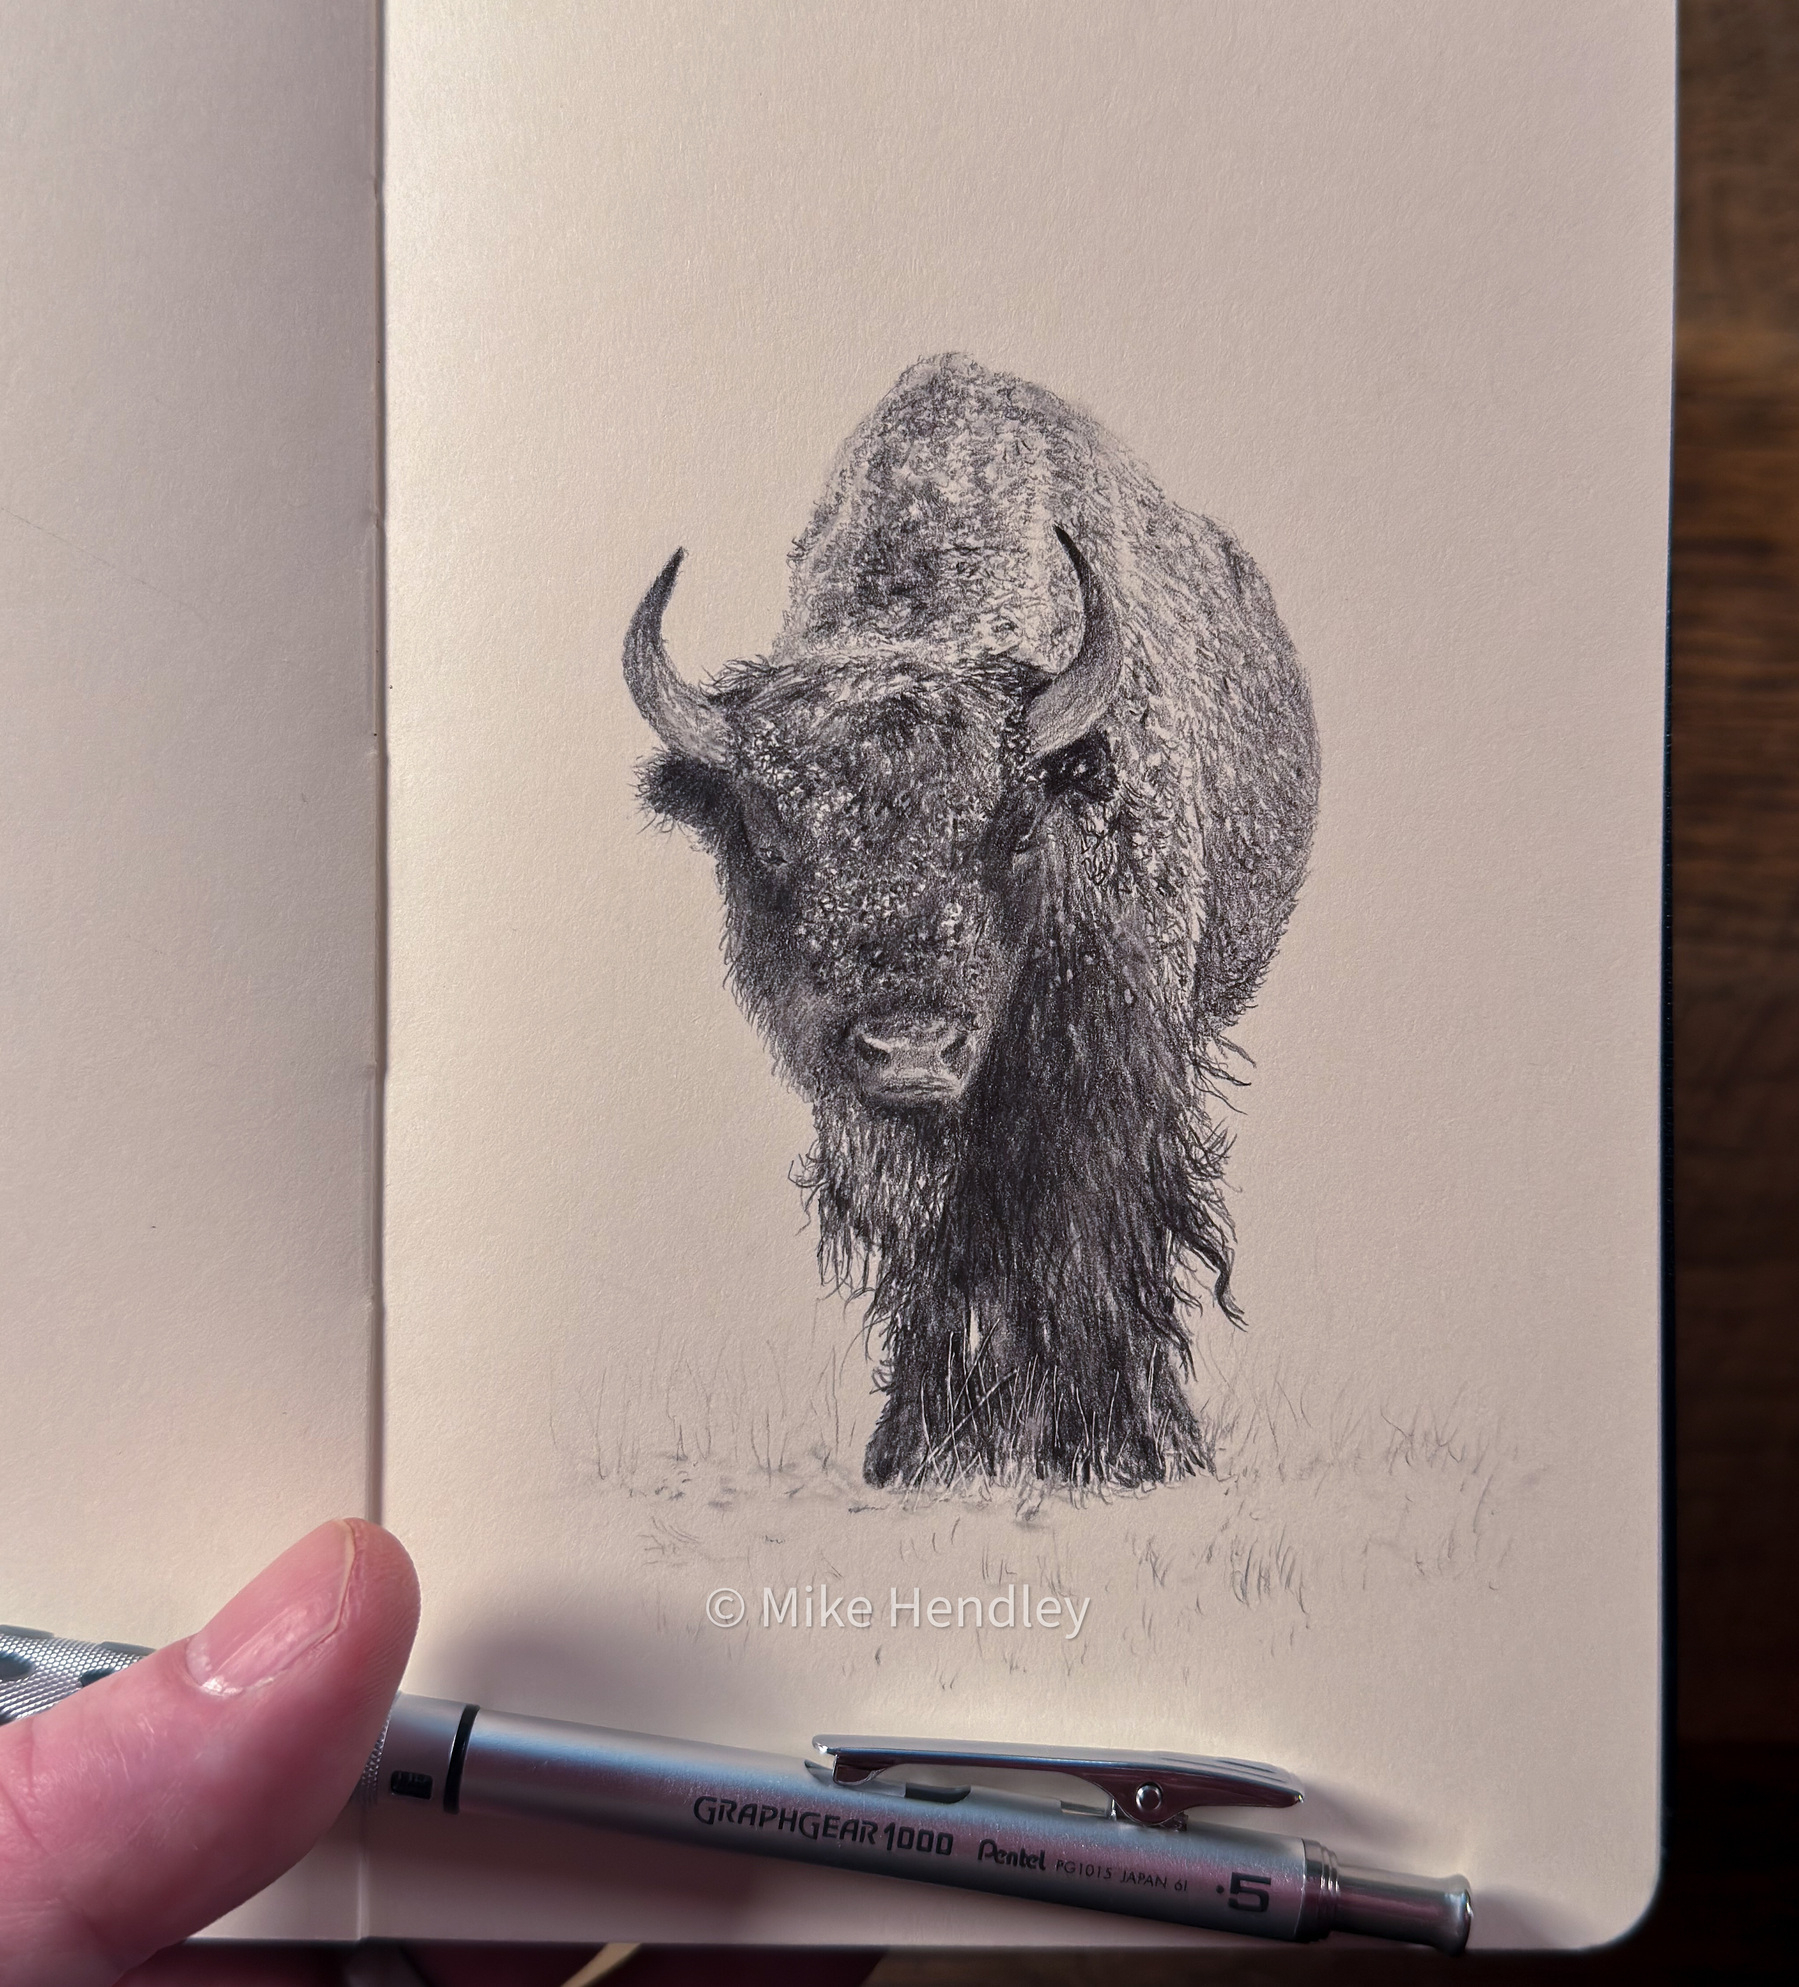 A detailed pencil drawing of a bison with a dense, shaggy coat, visible in its textured shading. The bison's head is facing forward, with its two curved horns framing a serene expression. The artwork is on a tan-colored page in a sketchbook, and there's a Pentel Graphgear 1000 mechanical pencil placed at the bottom for scale.